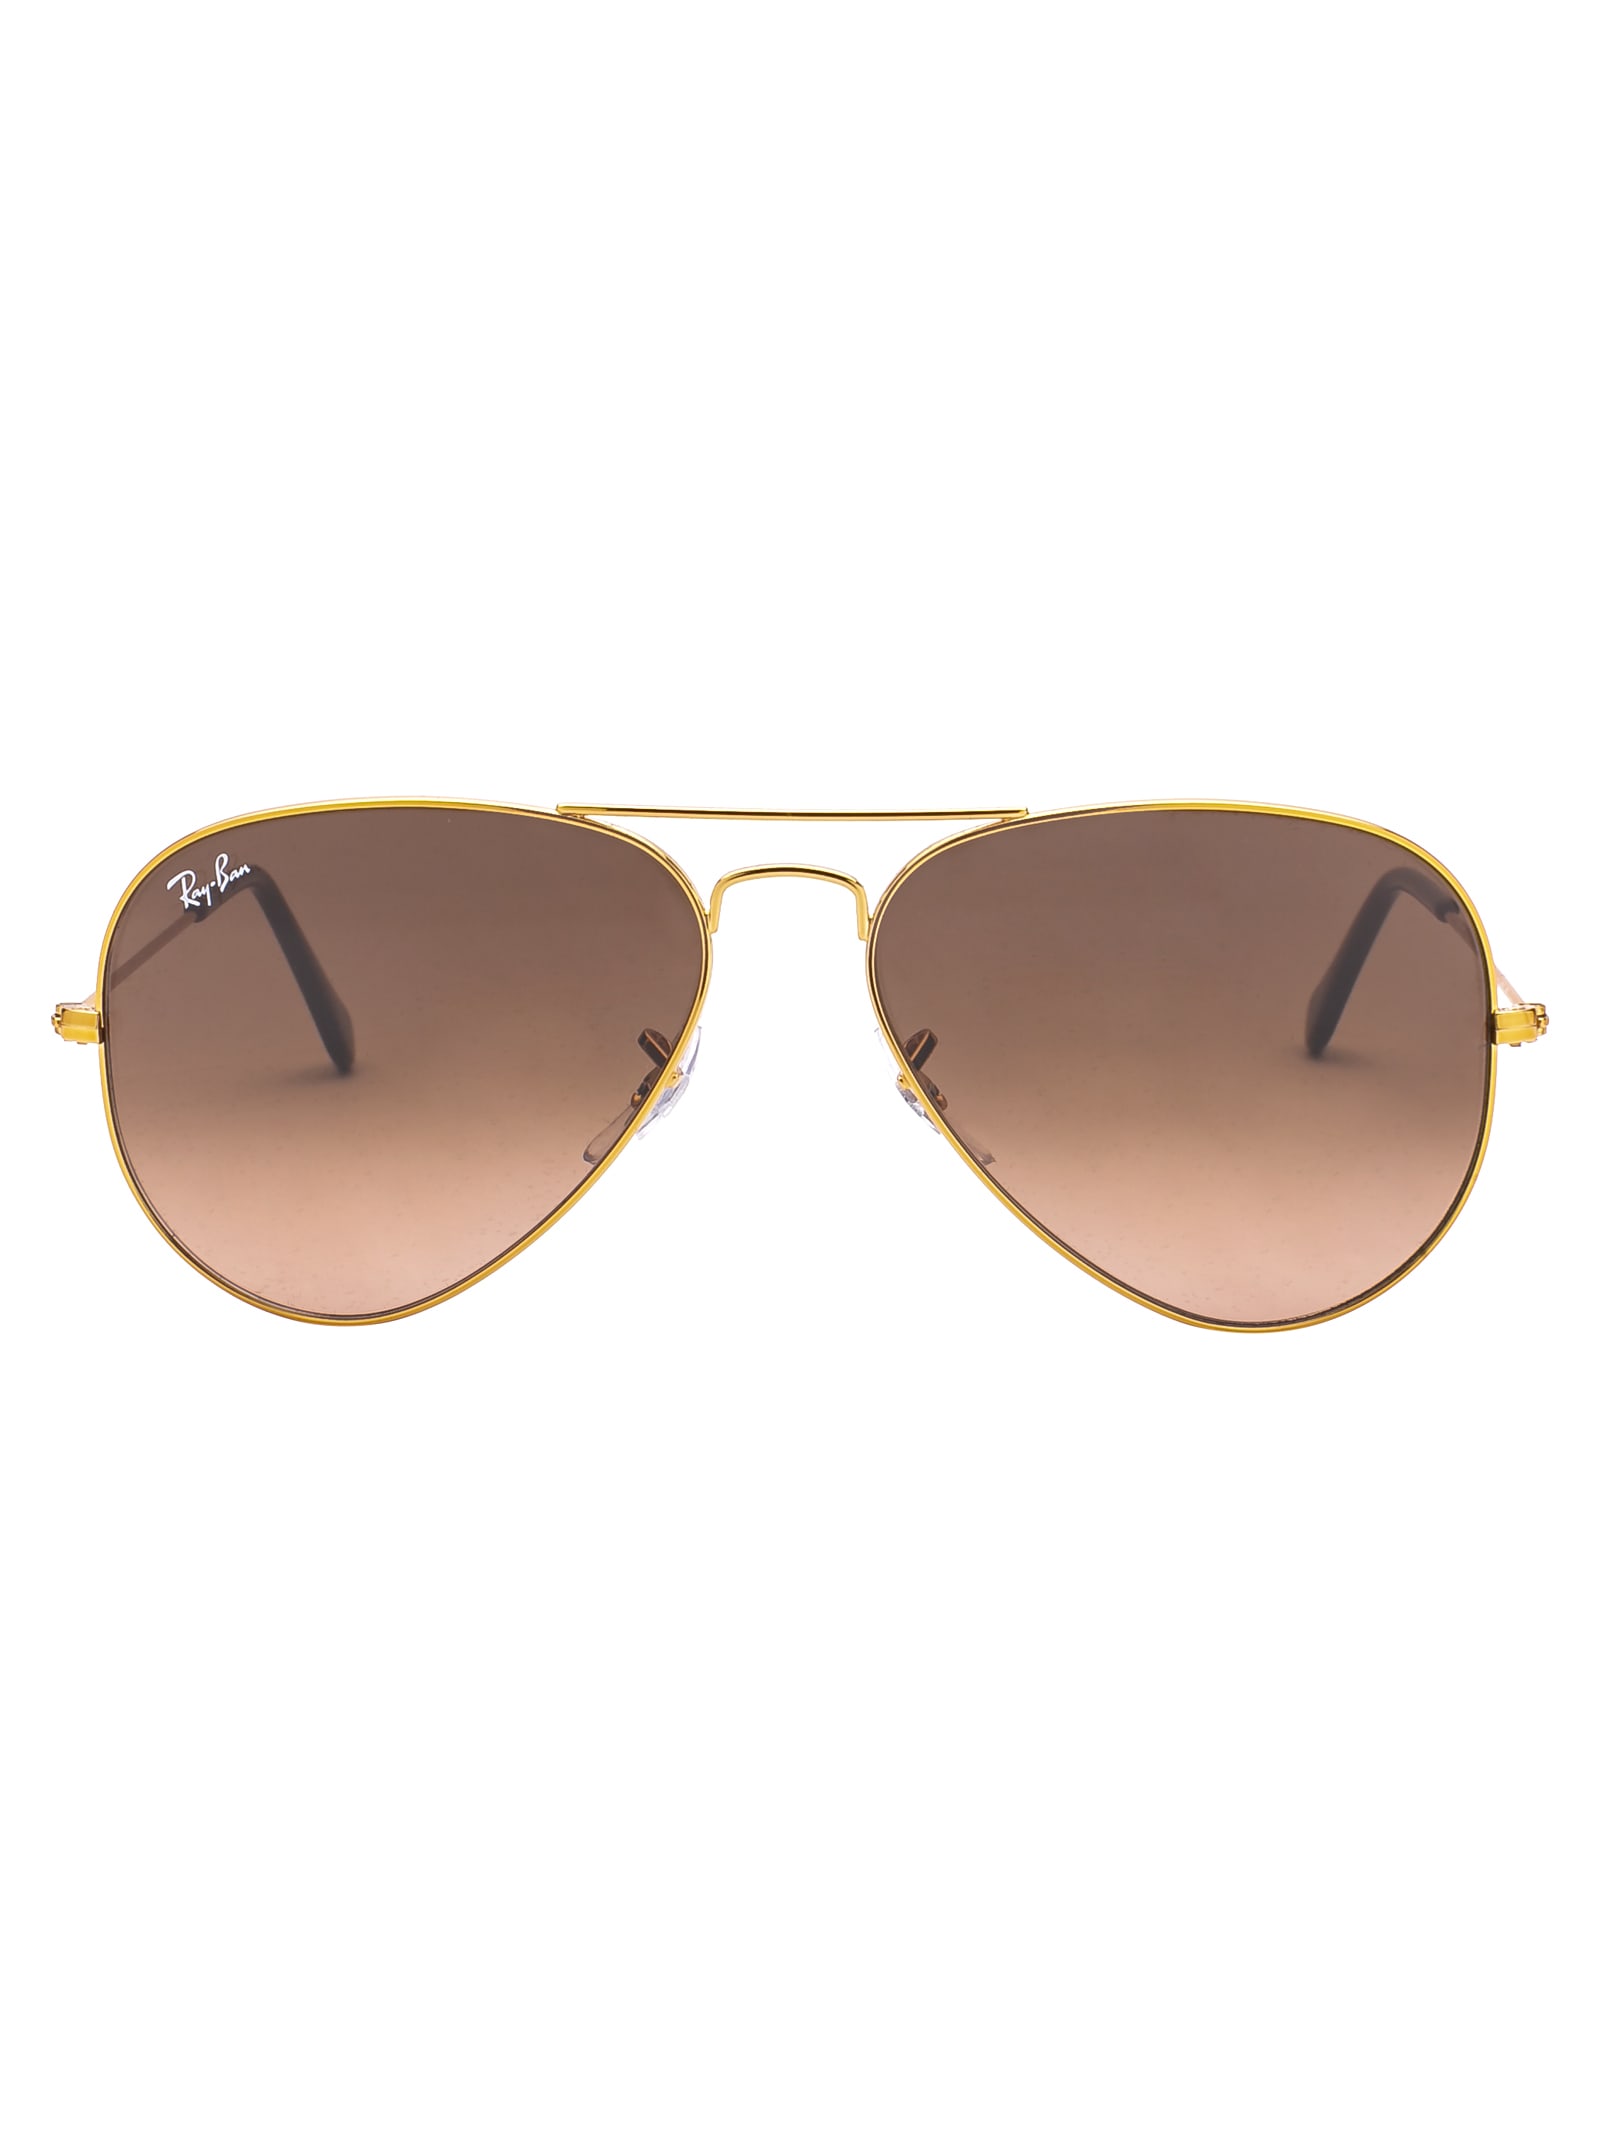 Shop Ray Ban Aviator Large Metal Sunglasses In 9001a5 Light Bronze